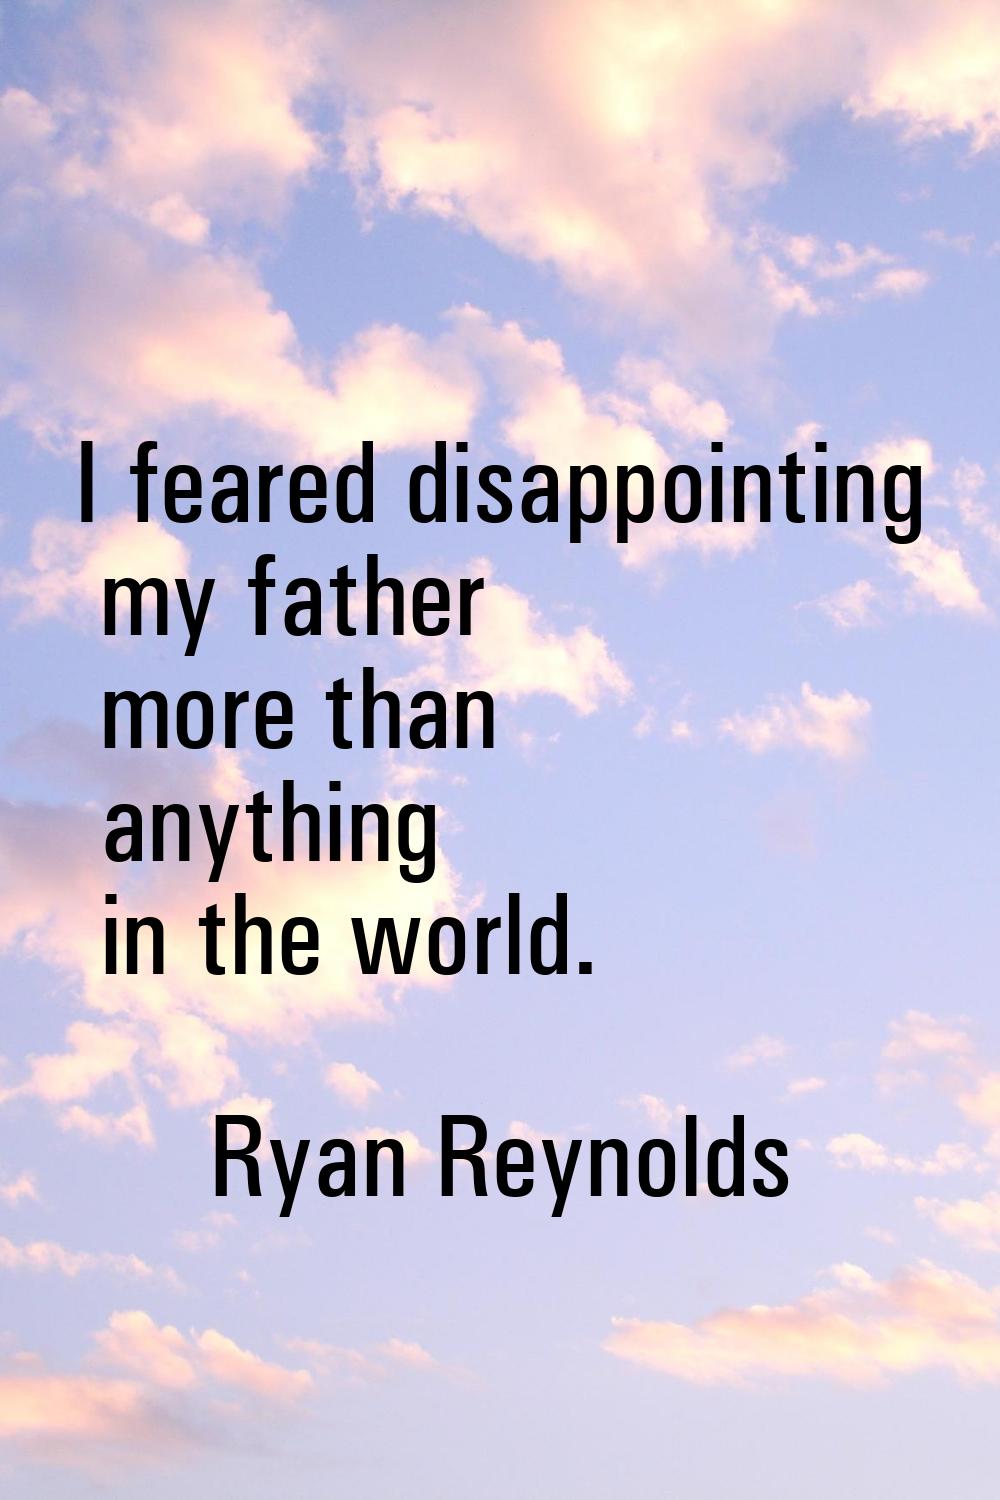 I feared disappointing my father more than anything in the world.